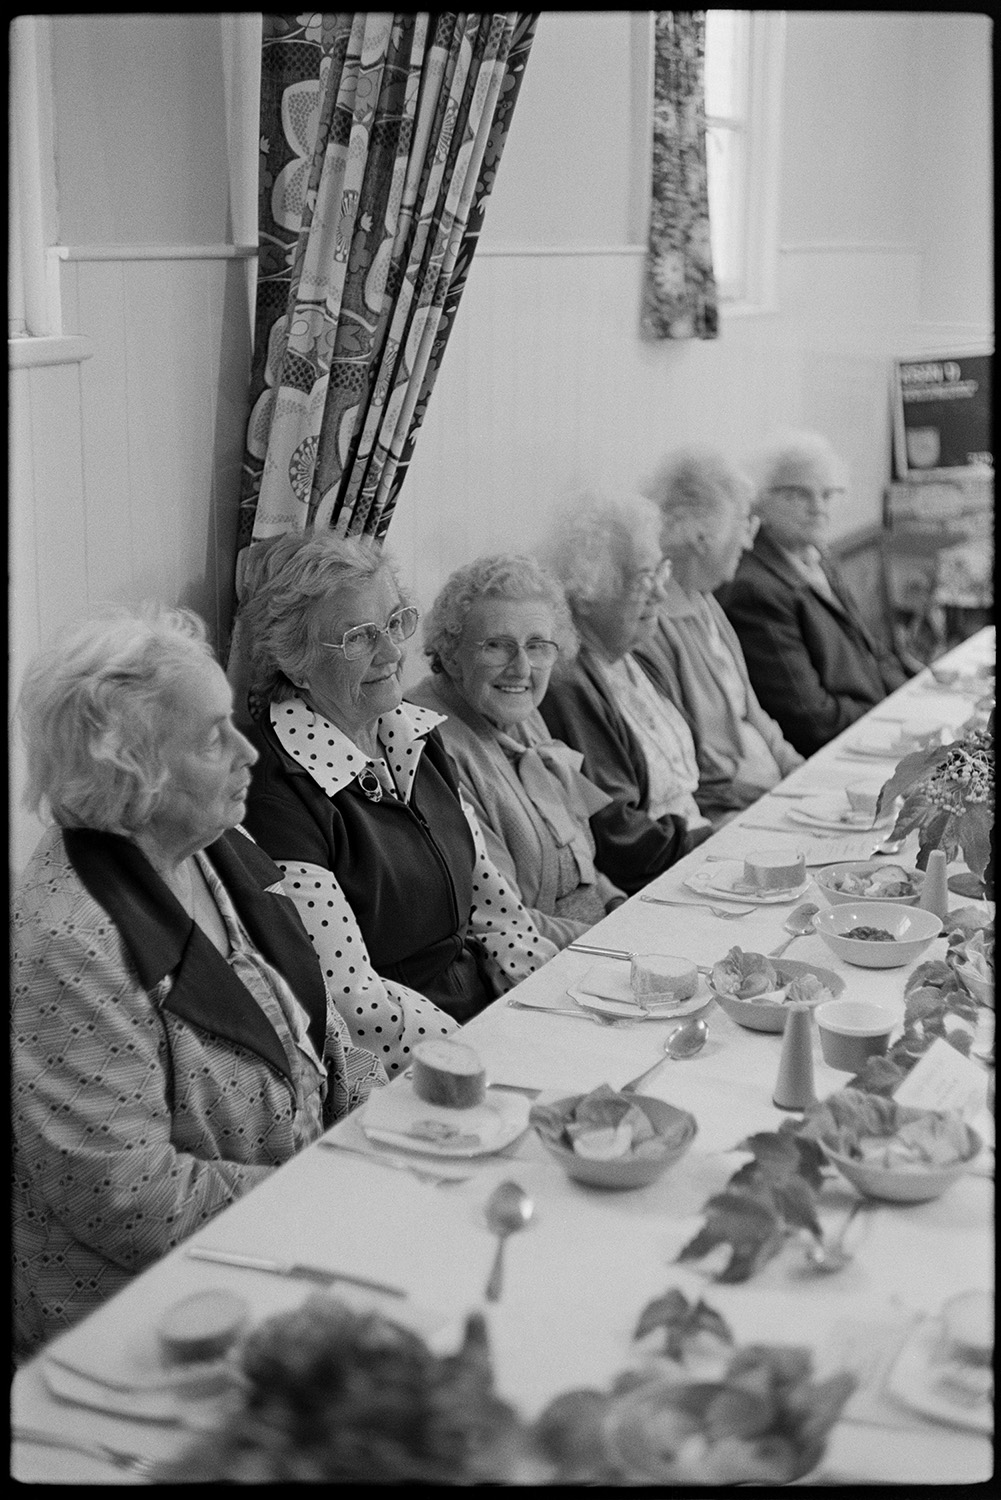 Congregational chapel Harvest supper, singing after meal, sale produce on display.
[Six elderly women sitting at a table at the Chulmleigh Congregational chapel Harvest supper. There is cutlery, crockery, table decorations and plates of bread rolls laid out on the table in front of them.]